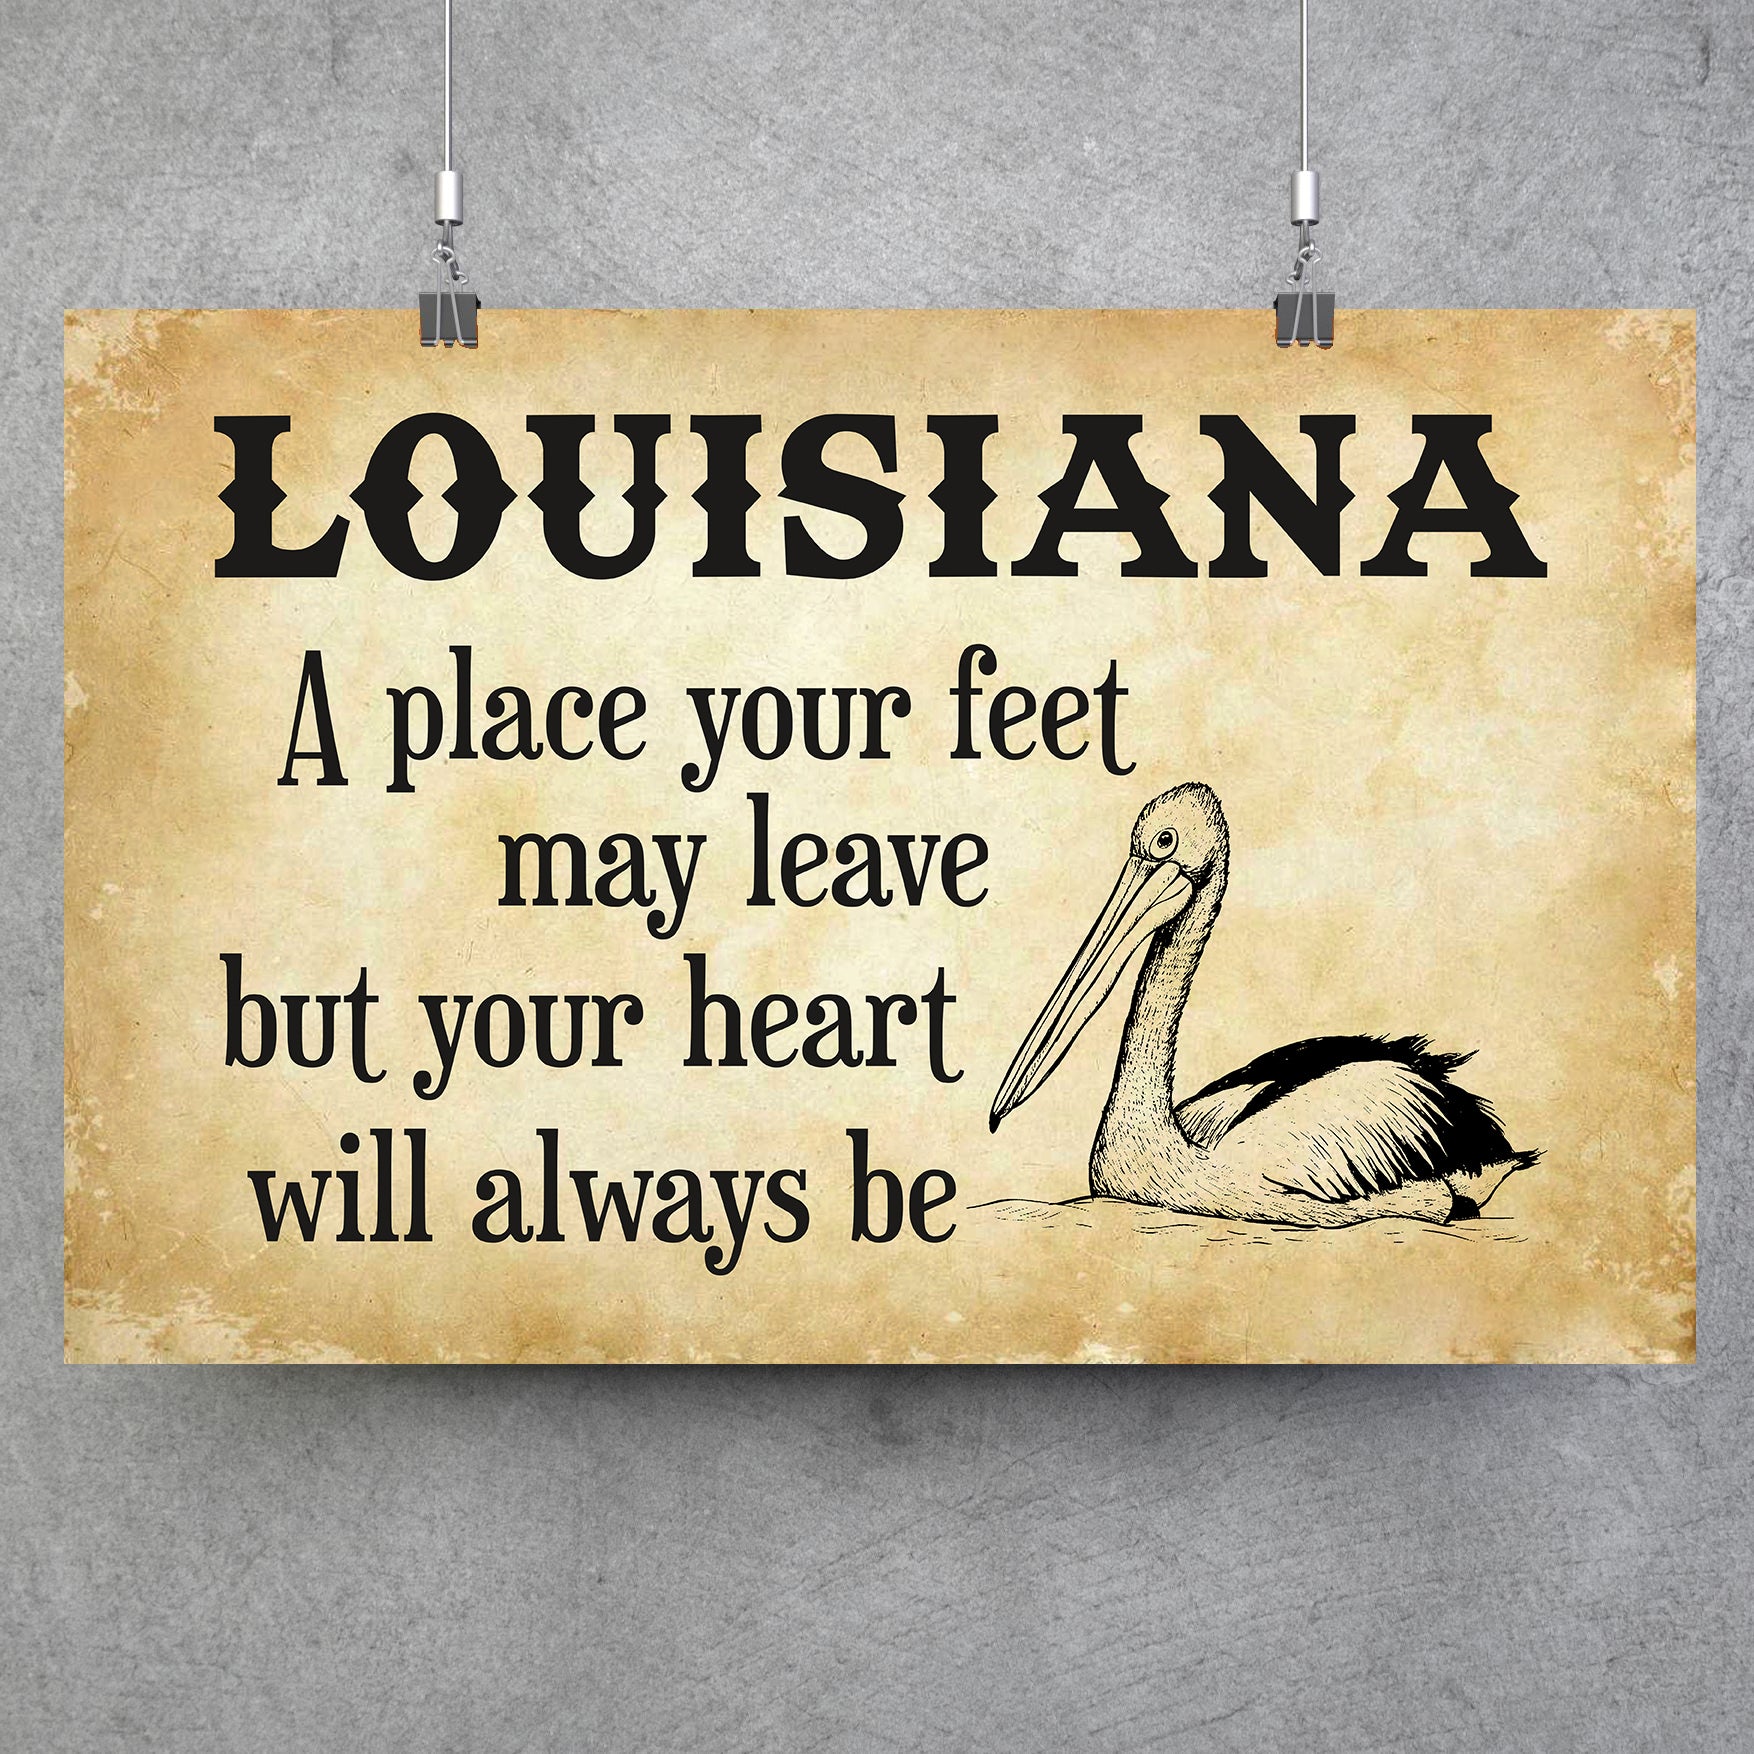 Louisiana A Place Your Heart Will Always Be Posters - Poster Teezalo